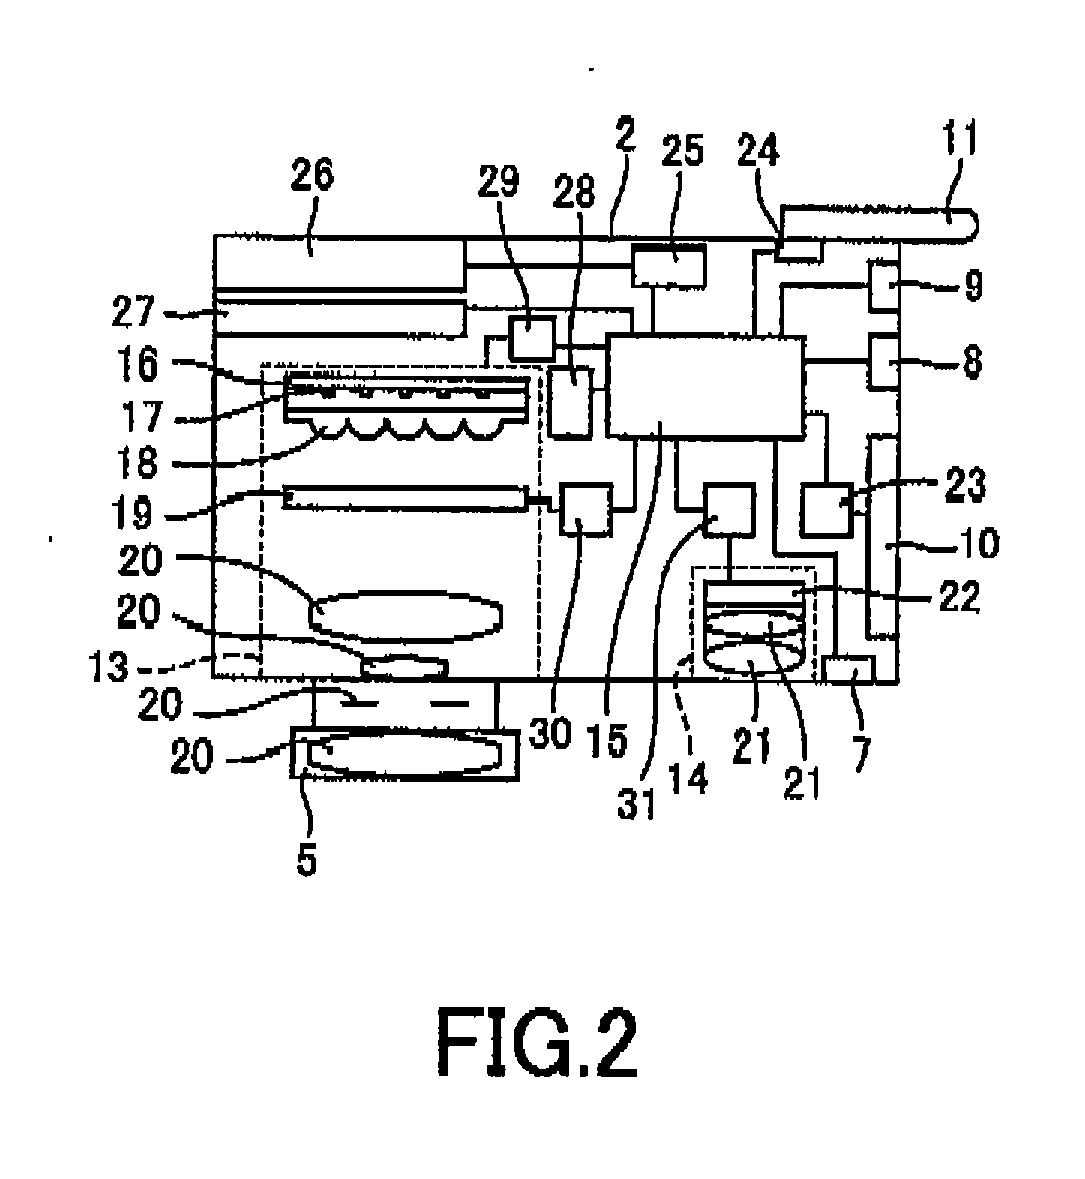 Three-dimensional object information acquisition using patterned light projection with optimized image-thresholding